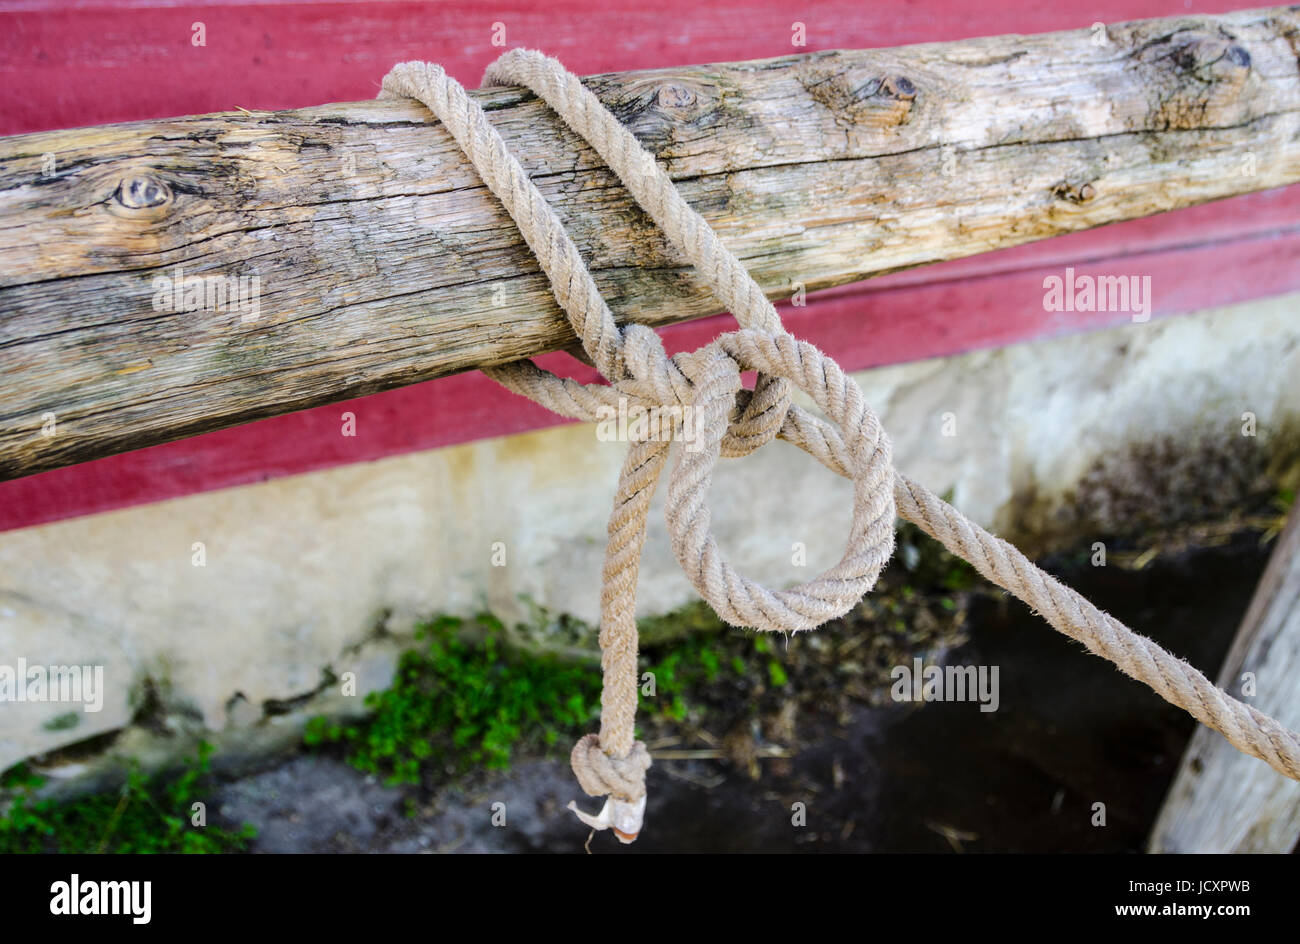 Rope tied on a worn hitching post for tethering horses Stock Photo